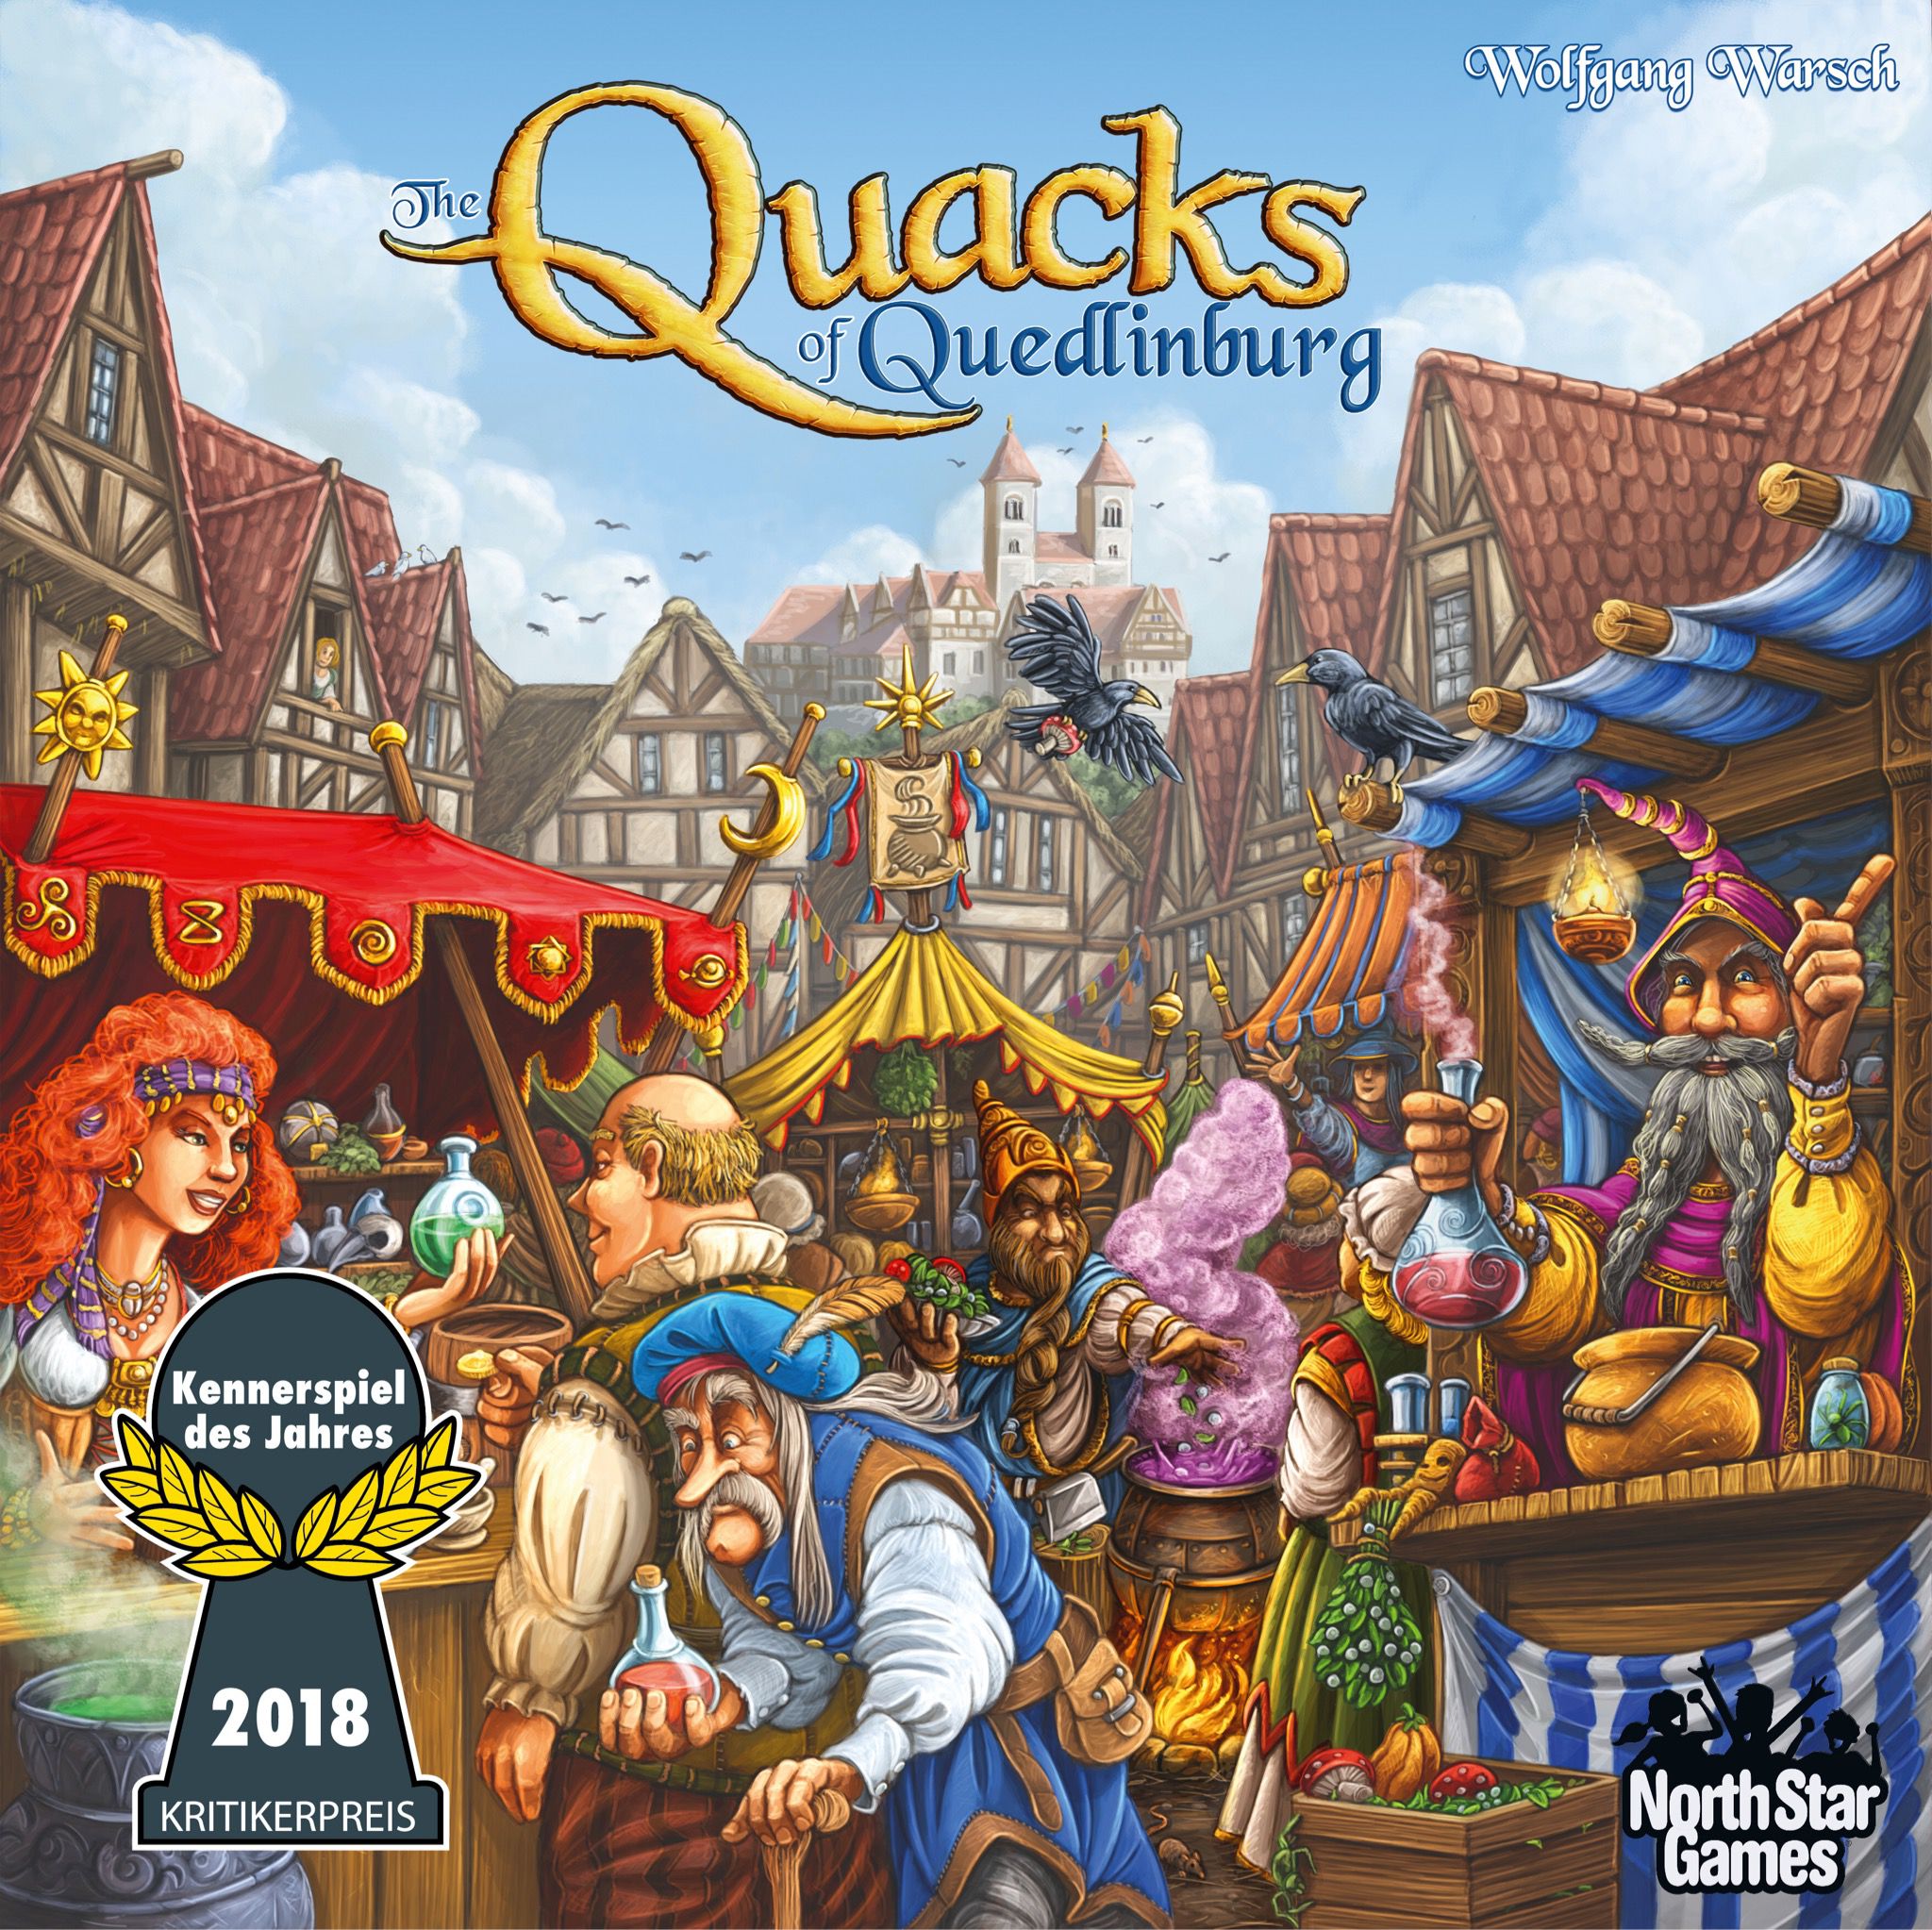 Tabletop art for the tabletop game Quacs of Quedlnburg, a fantasy city showing a market and merchants with wares for sale